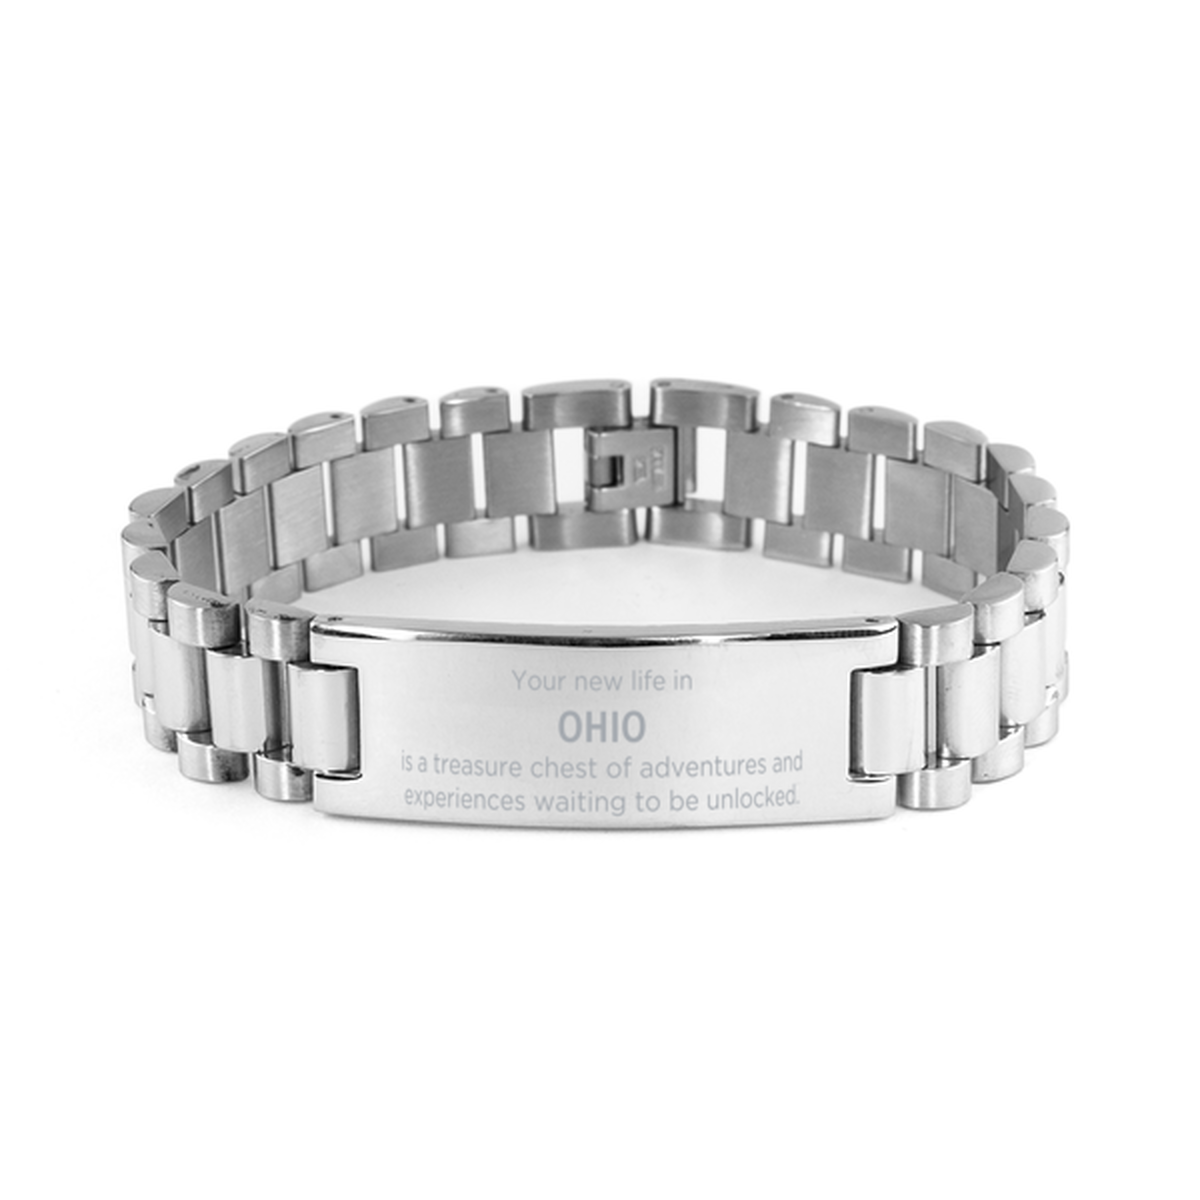 Moving to Ohio Gifts, Your new life in Ohio, Long Distance Ohio Christmas Ladder Stainless Steel Bracelet For Men, Women, Friends, Coworkers